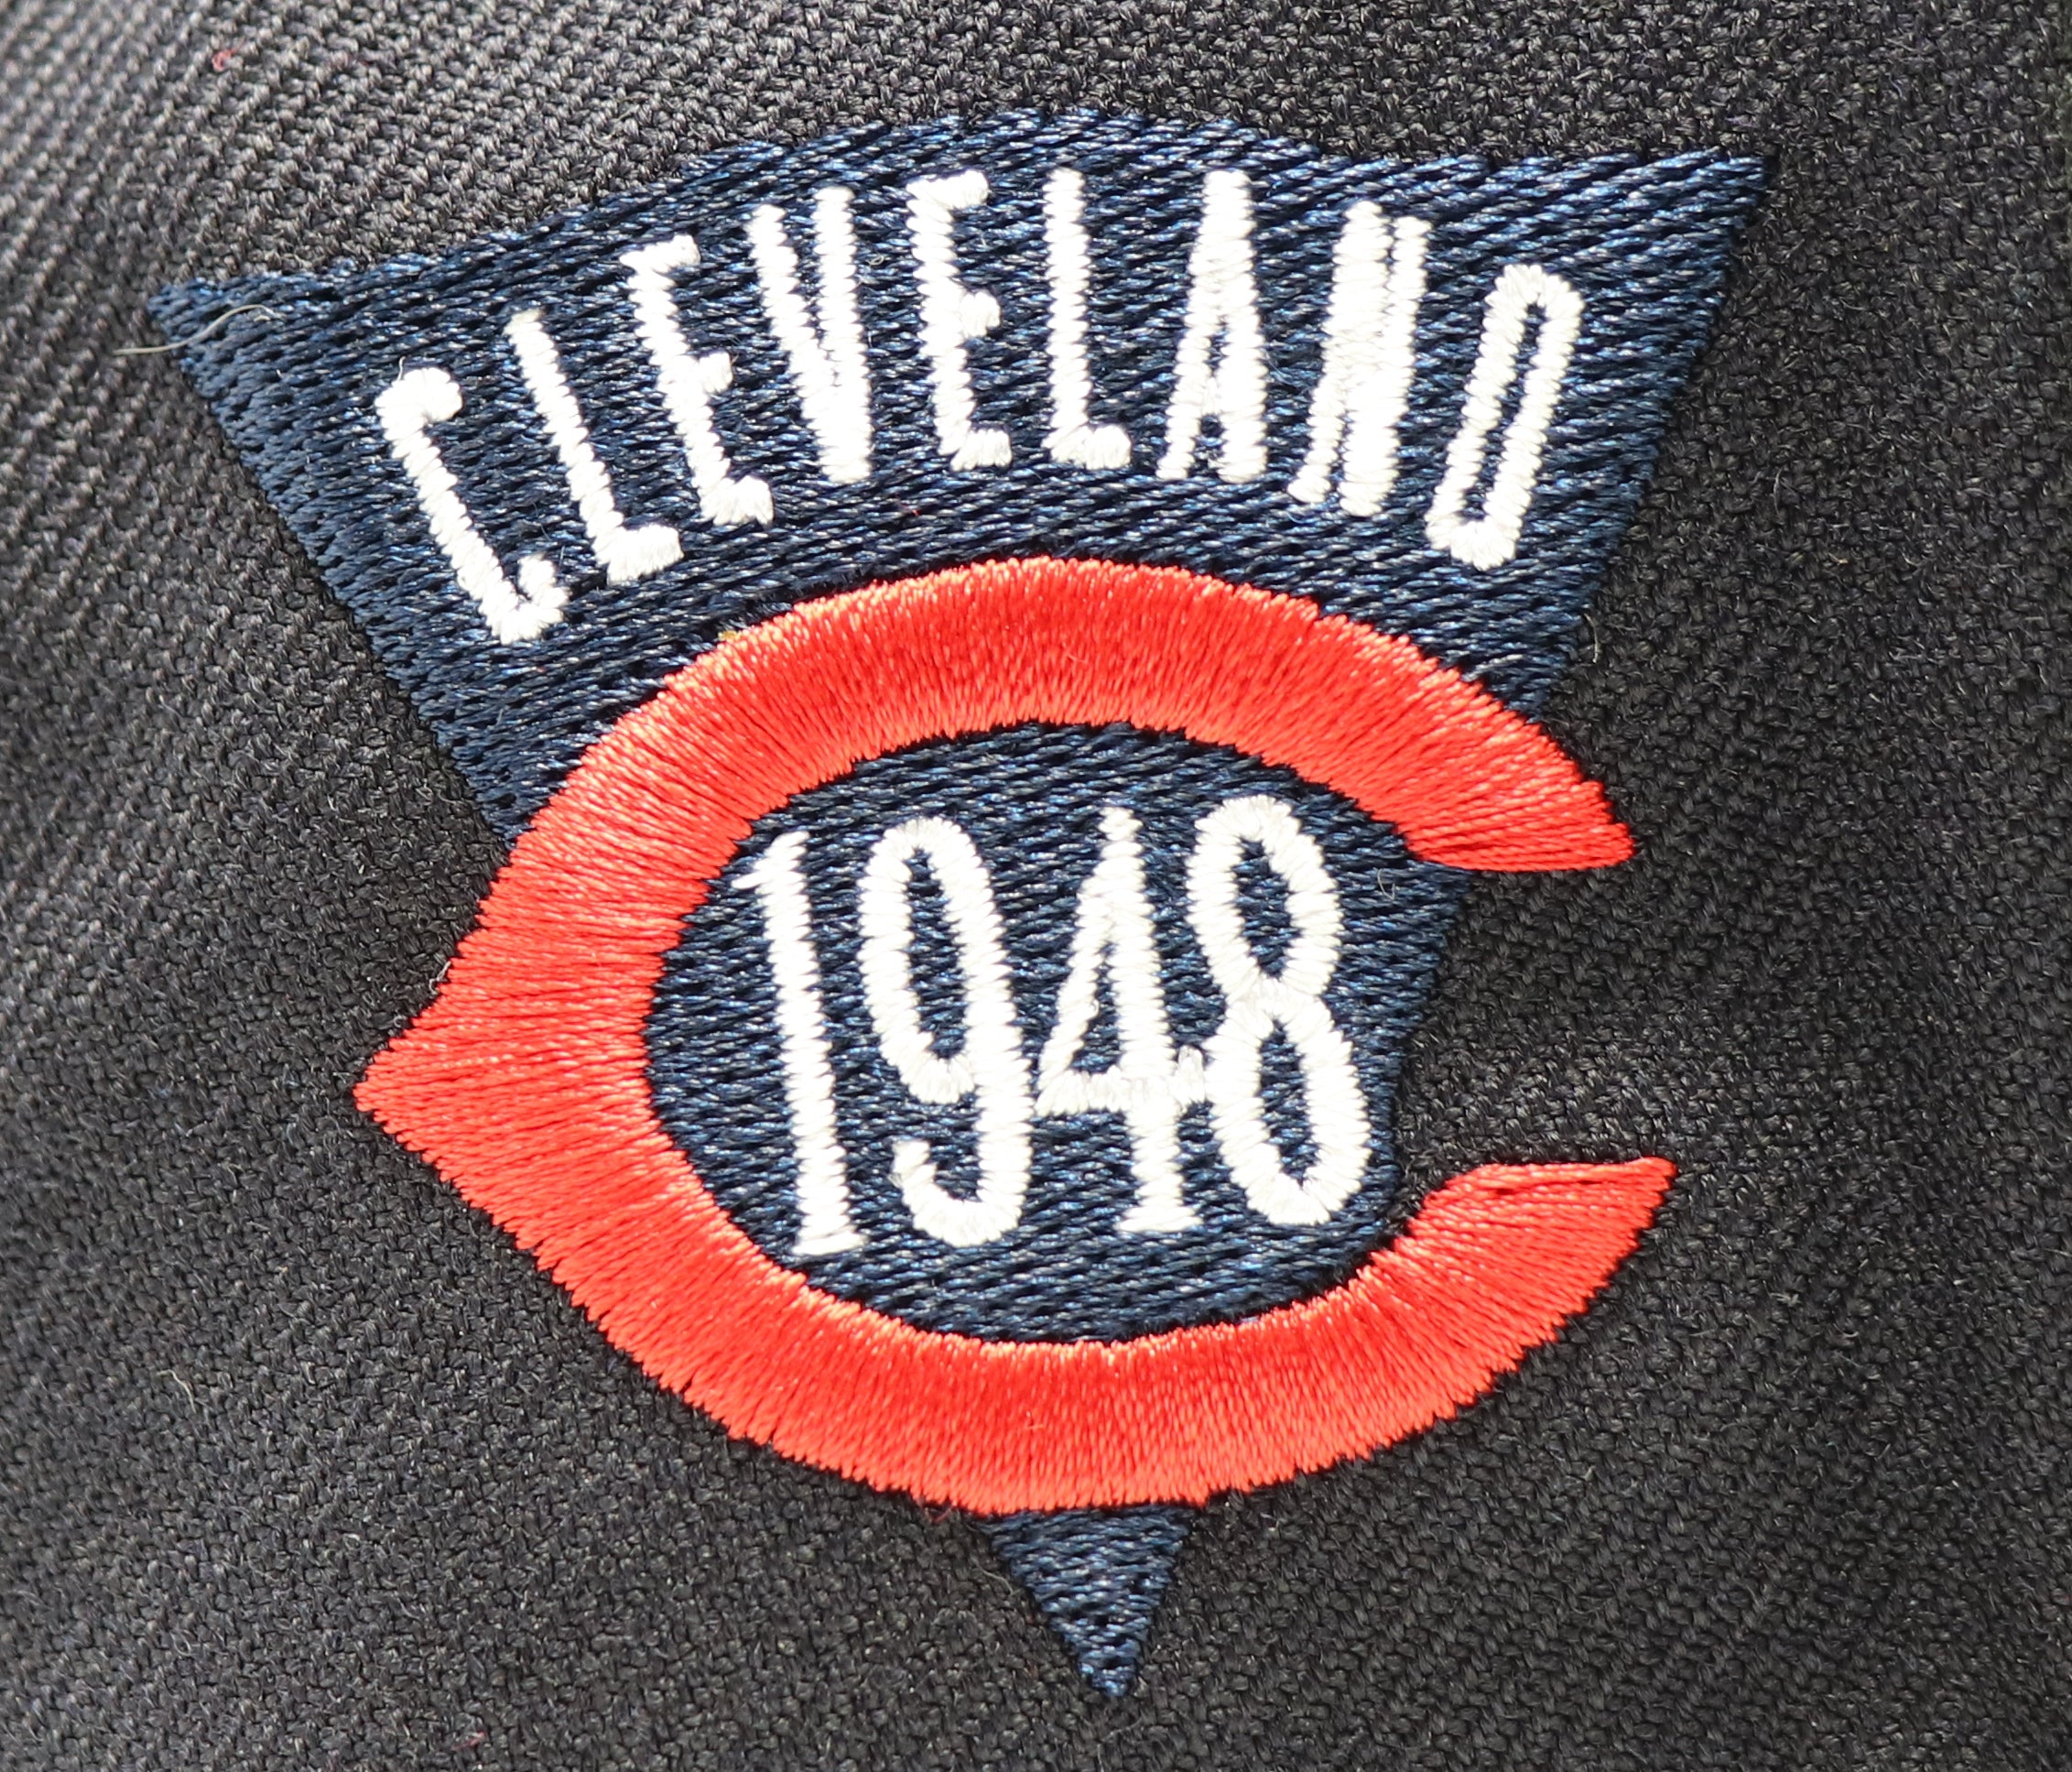 CLEVELAND INDIANS (1948 INDIANS) NEW ERA 59FIFTY FITTED (GREEN BOTTOM)